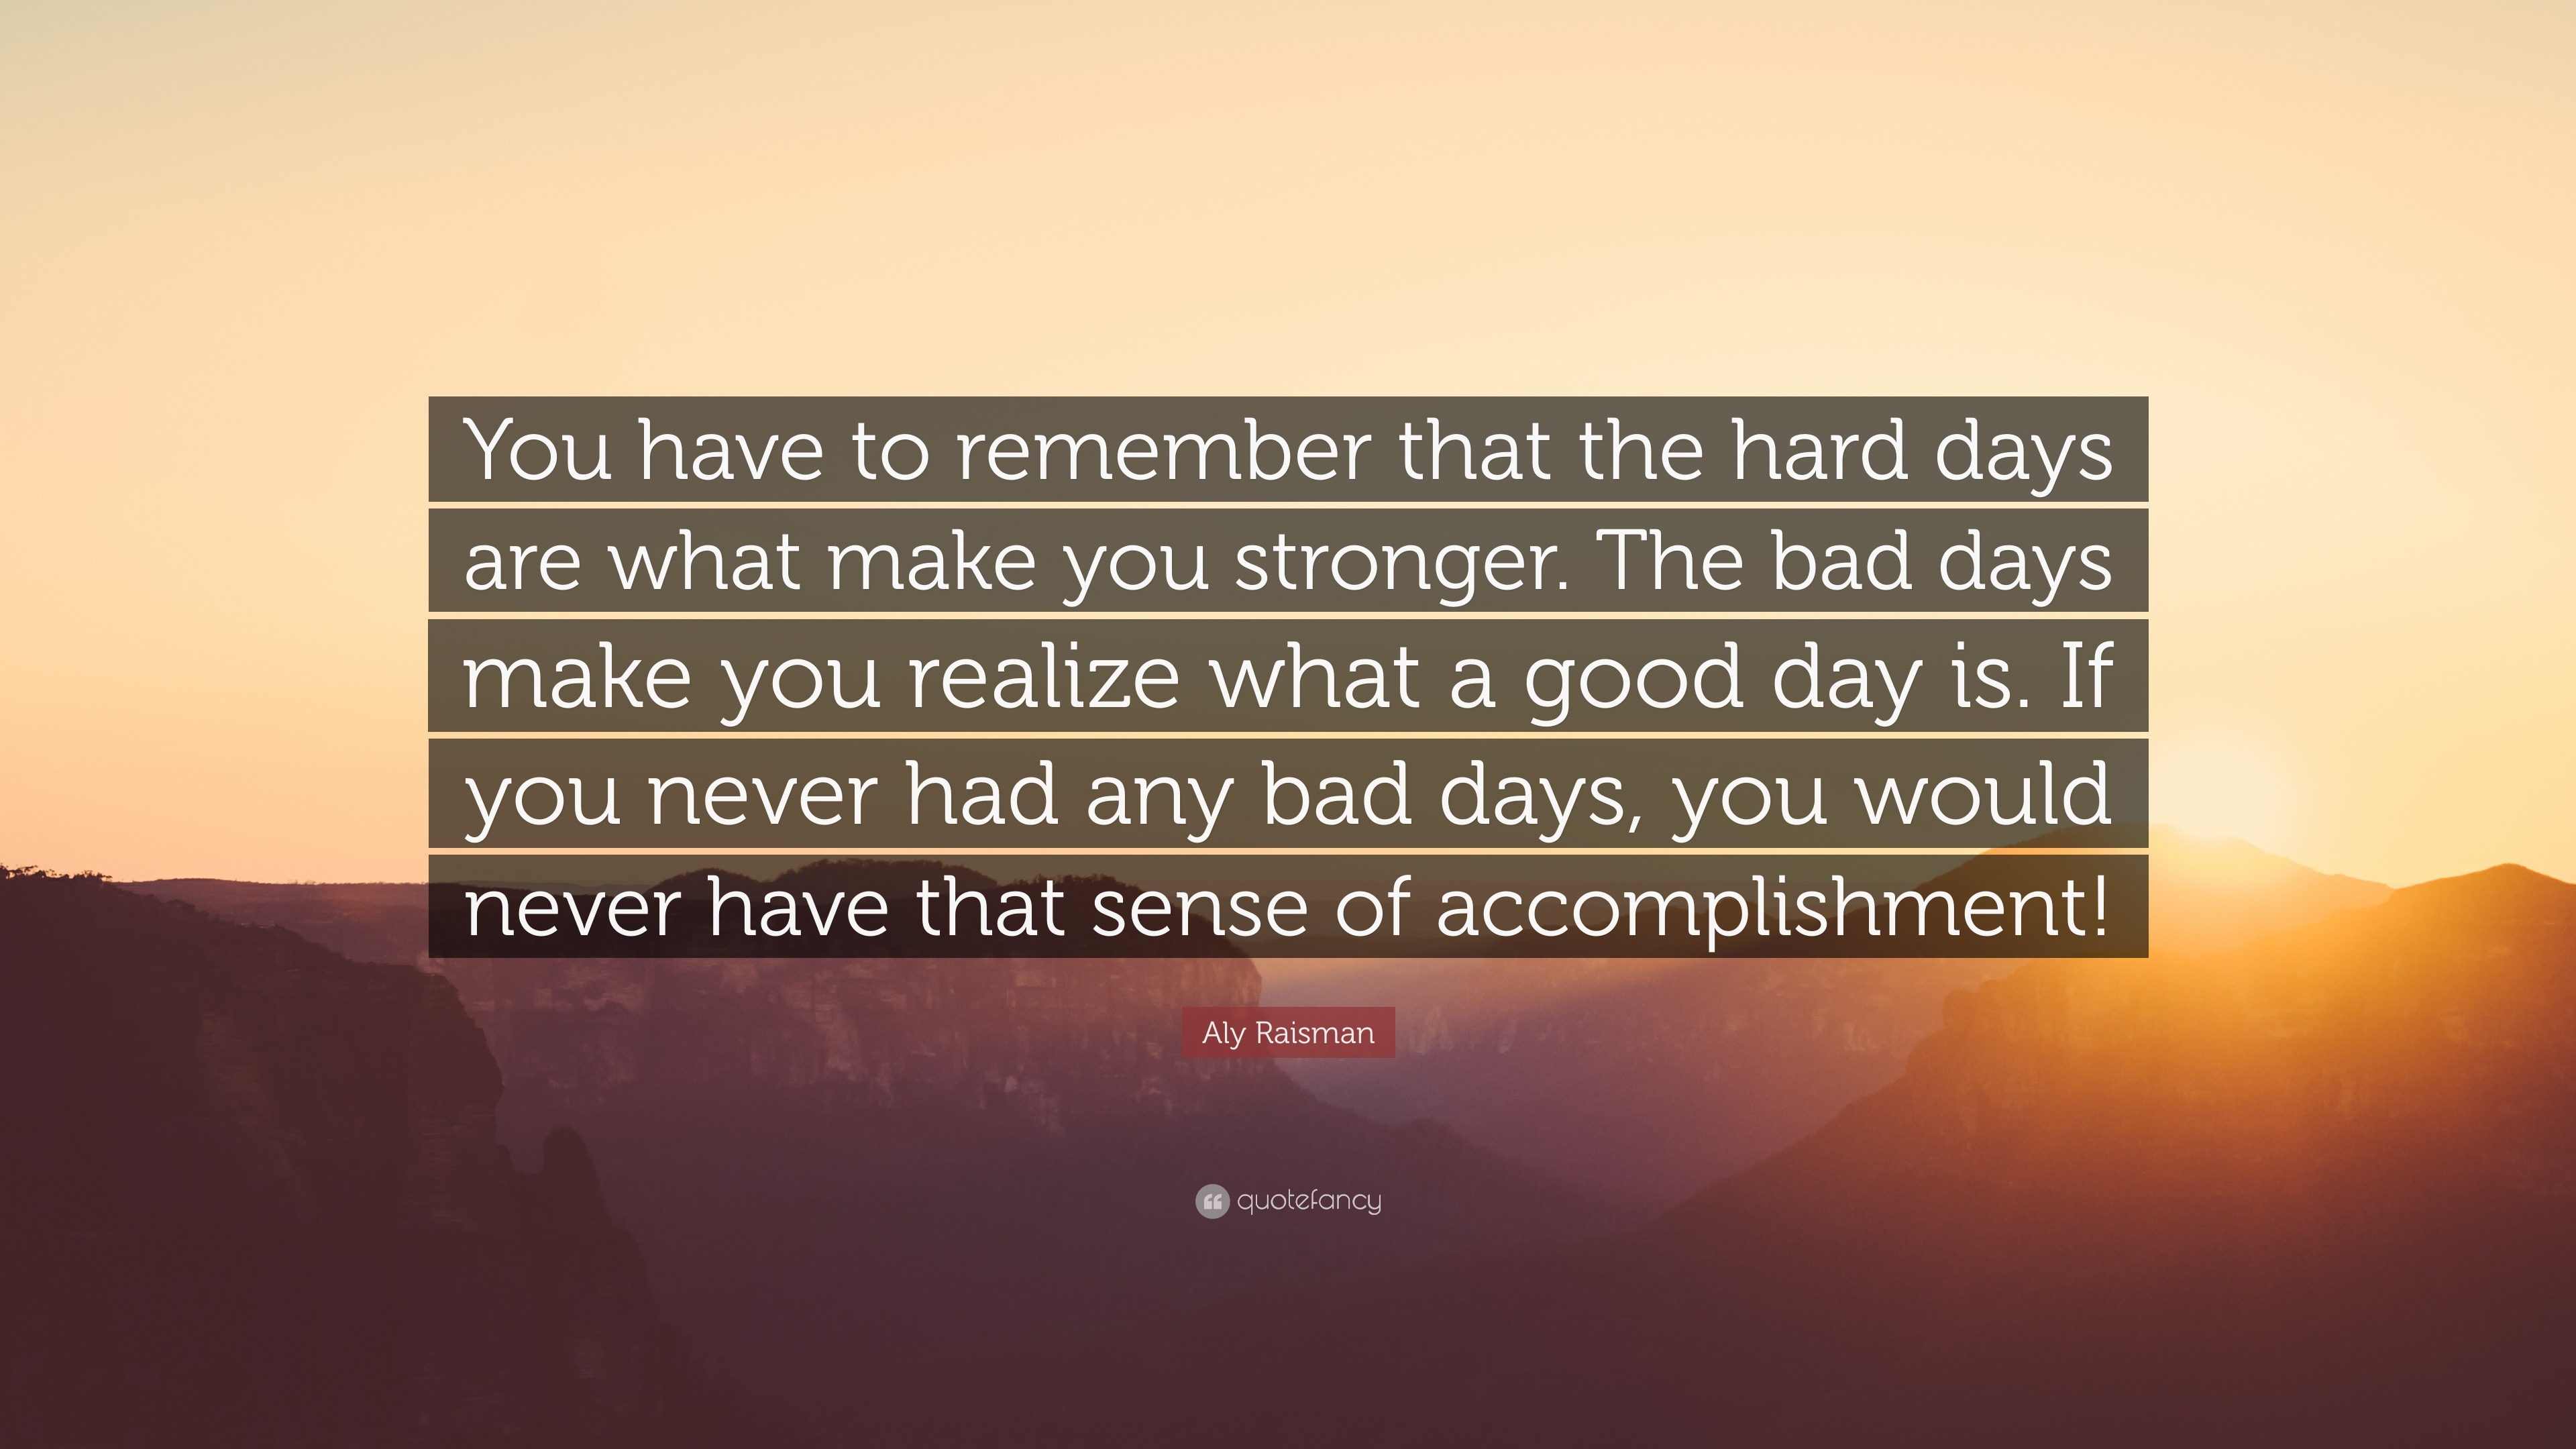 Aly Raisman Quote “You have to remember that the hard